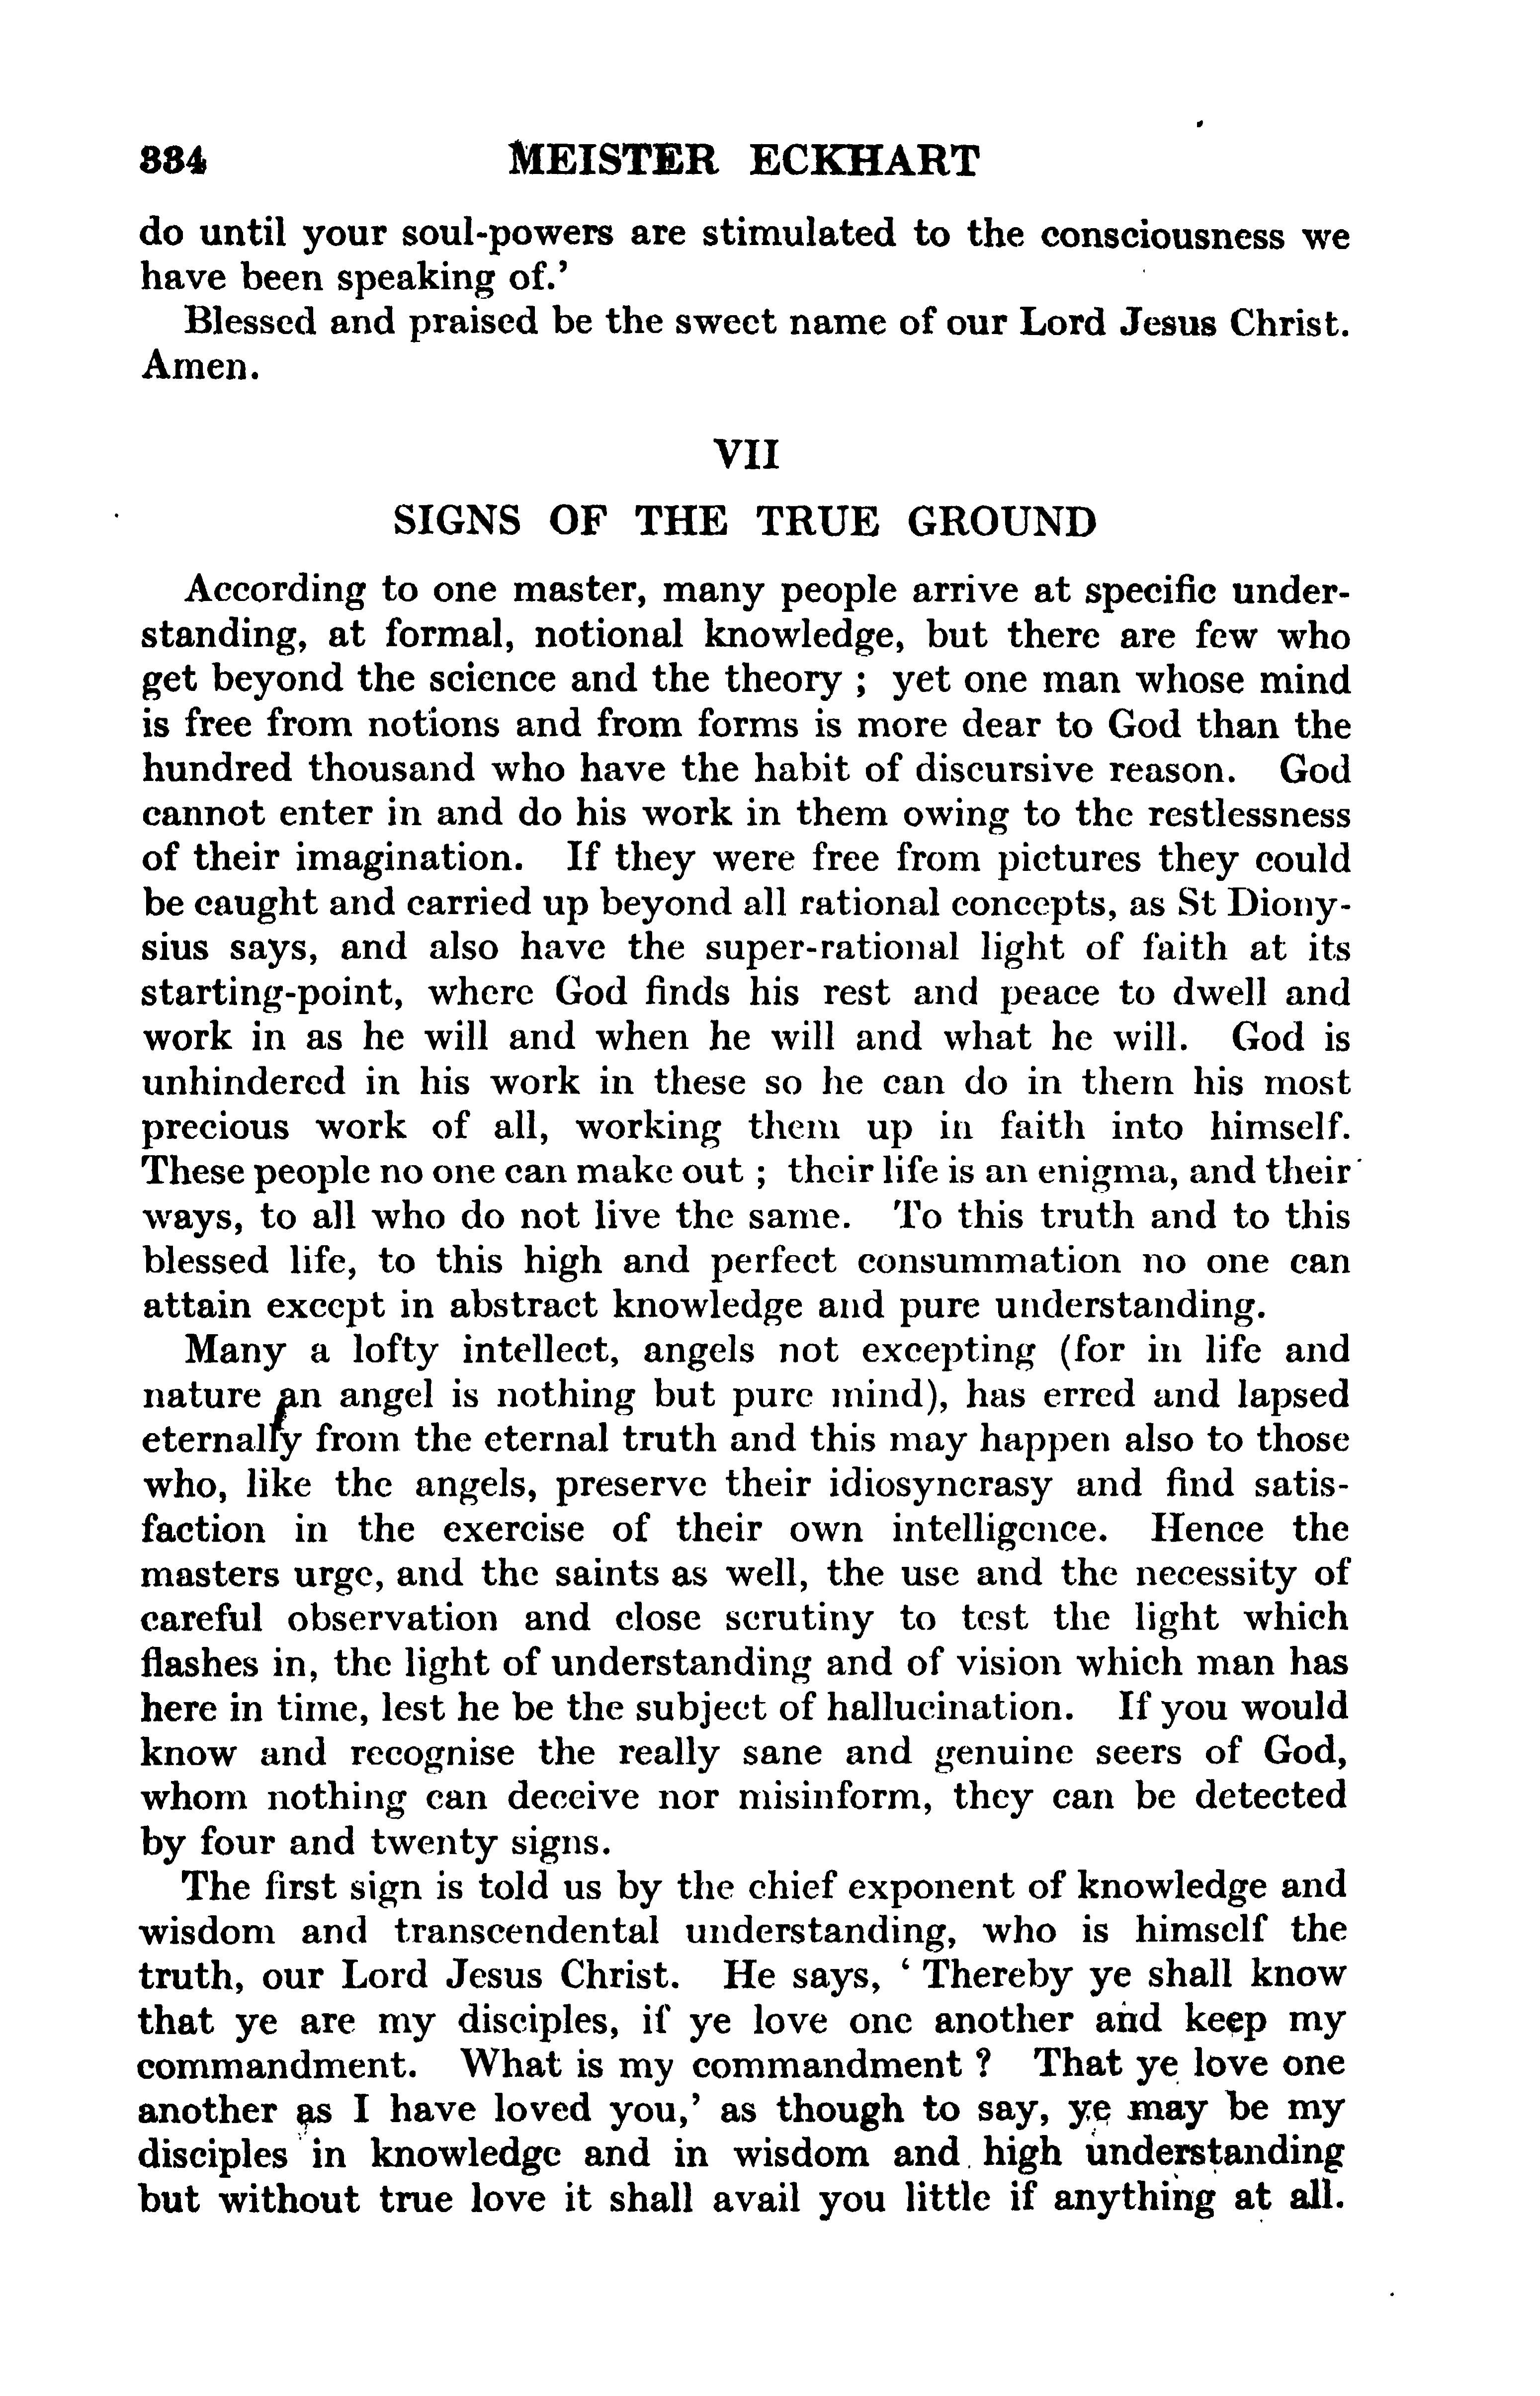 Image of page 0358